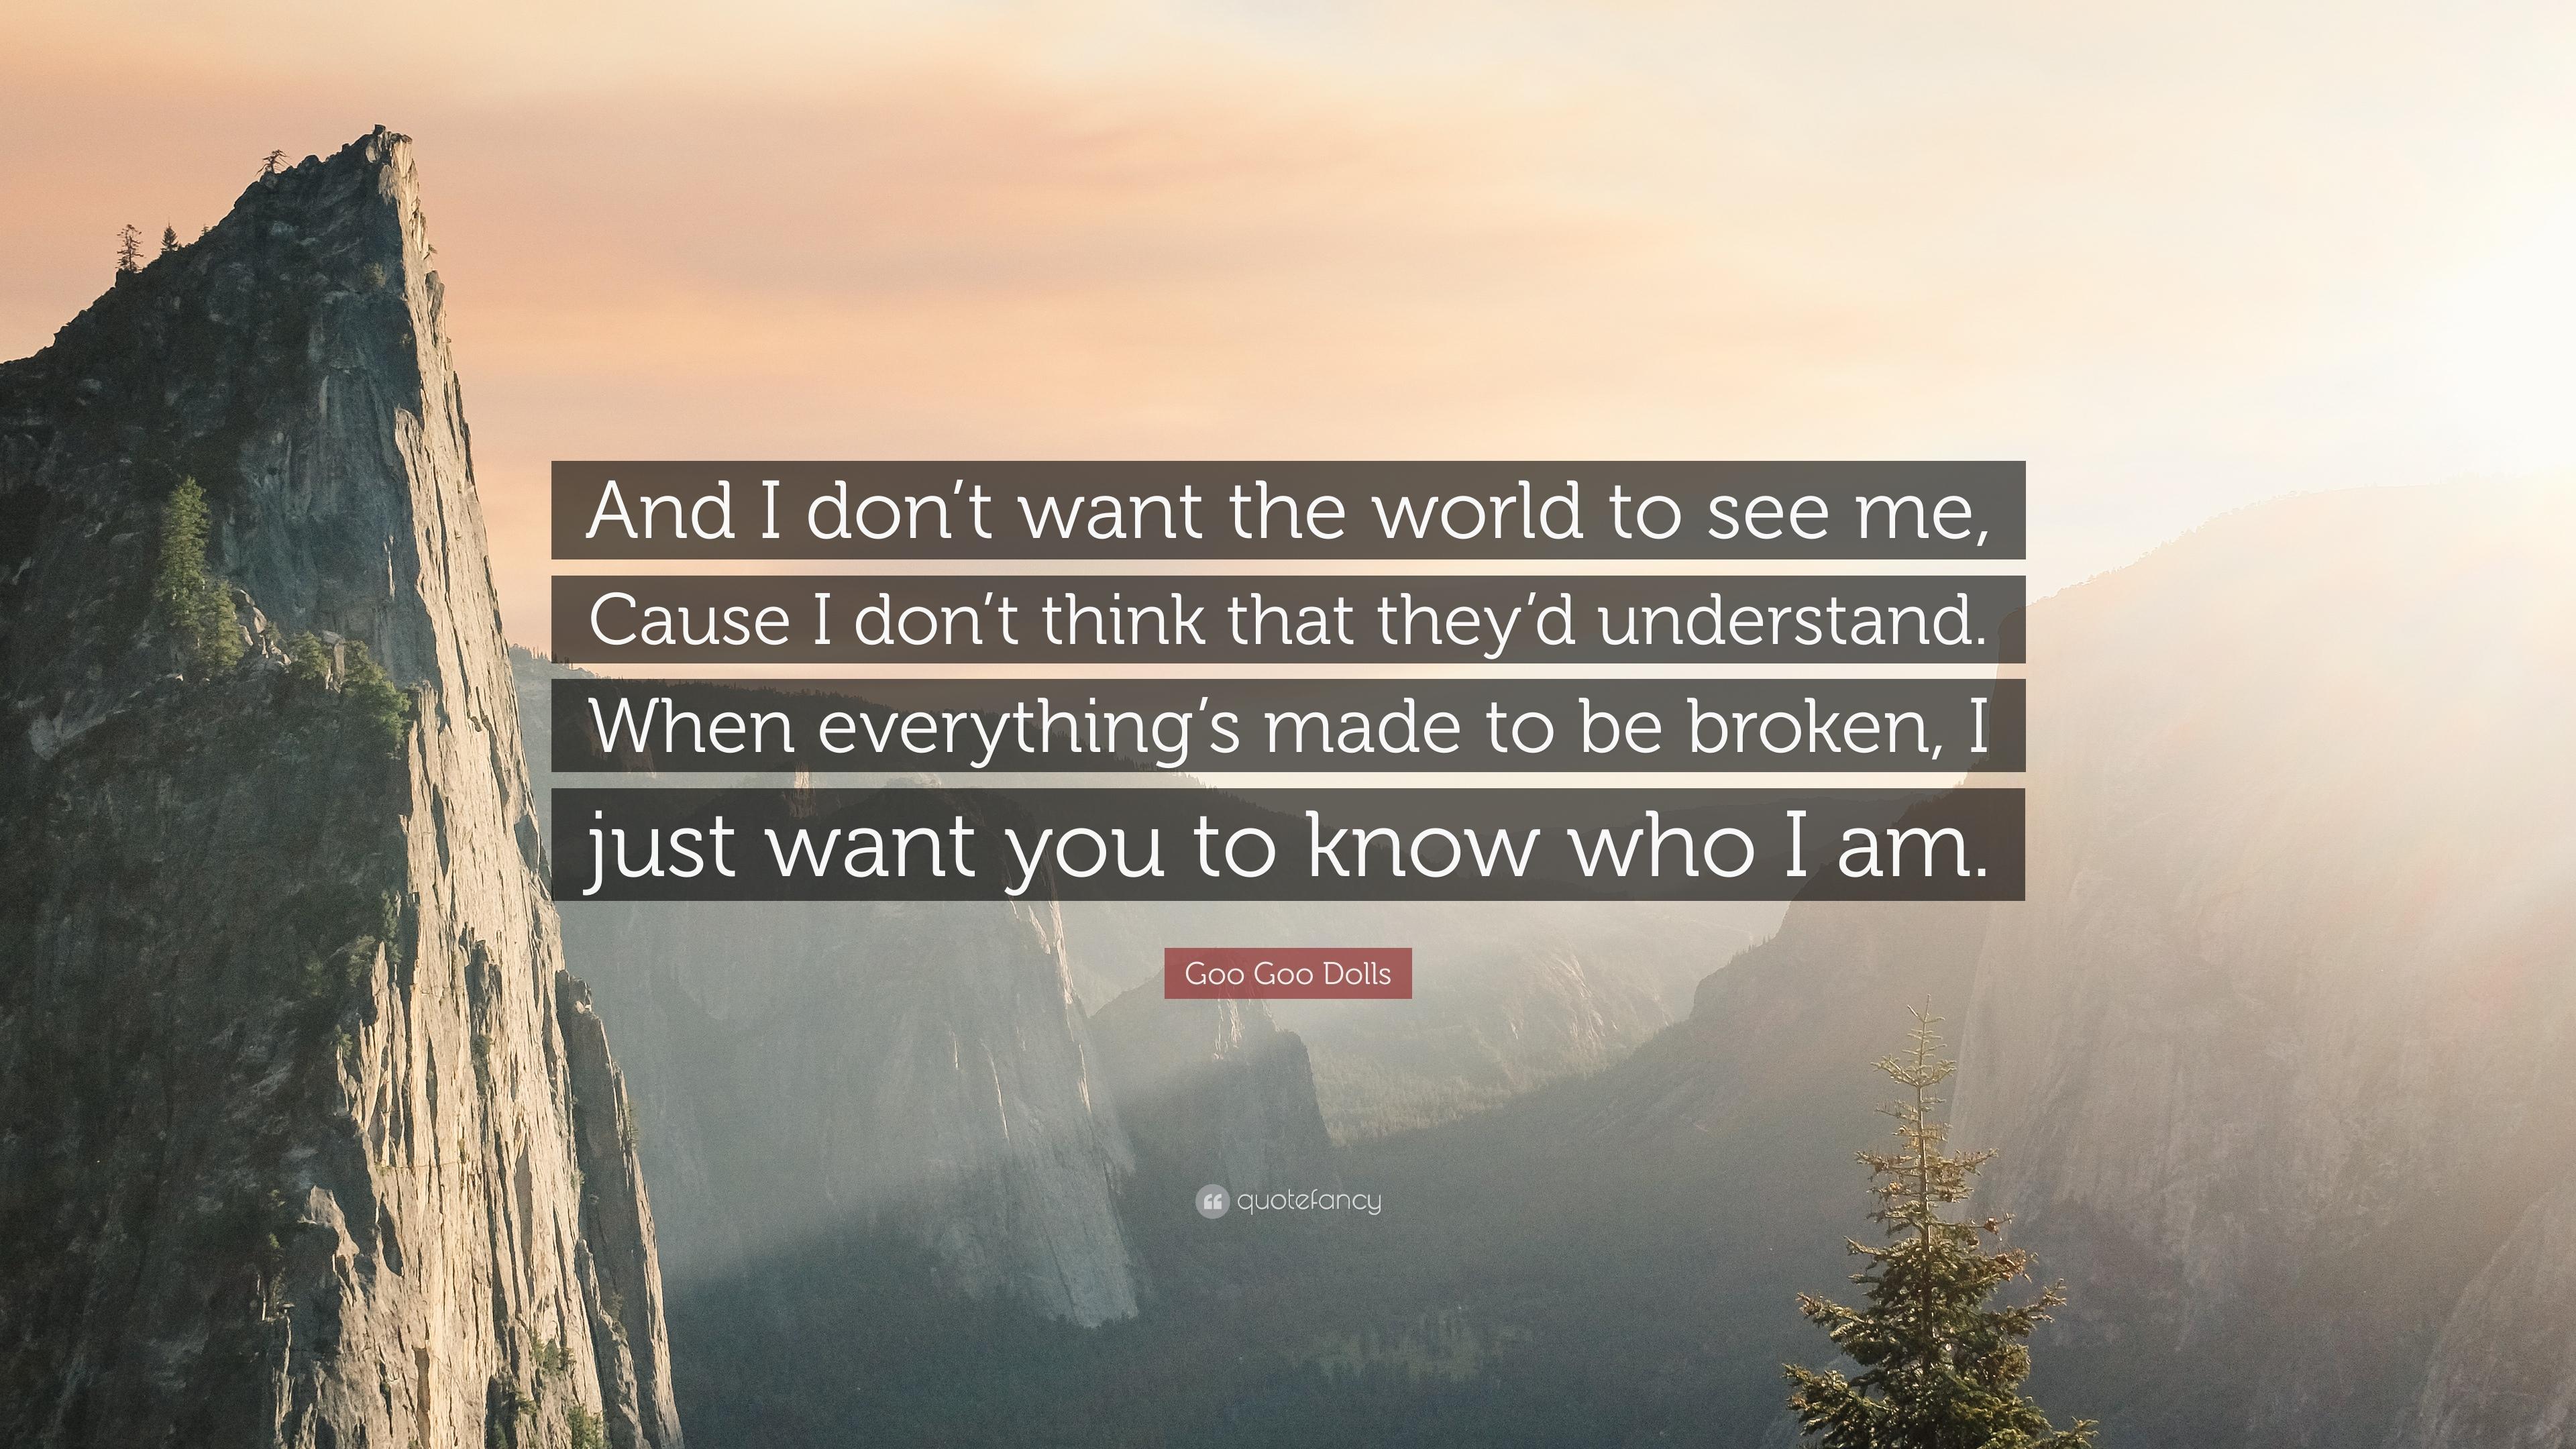 Goo Goo Dolls Quote: “And I don't want the world to see me, Cause I